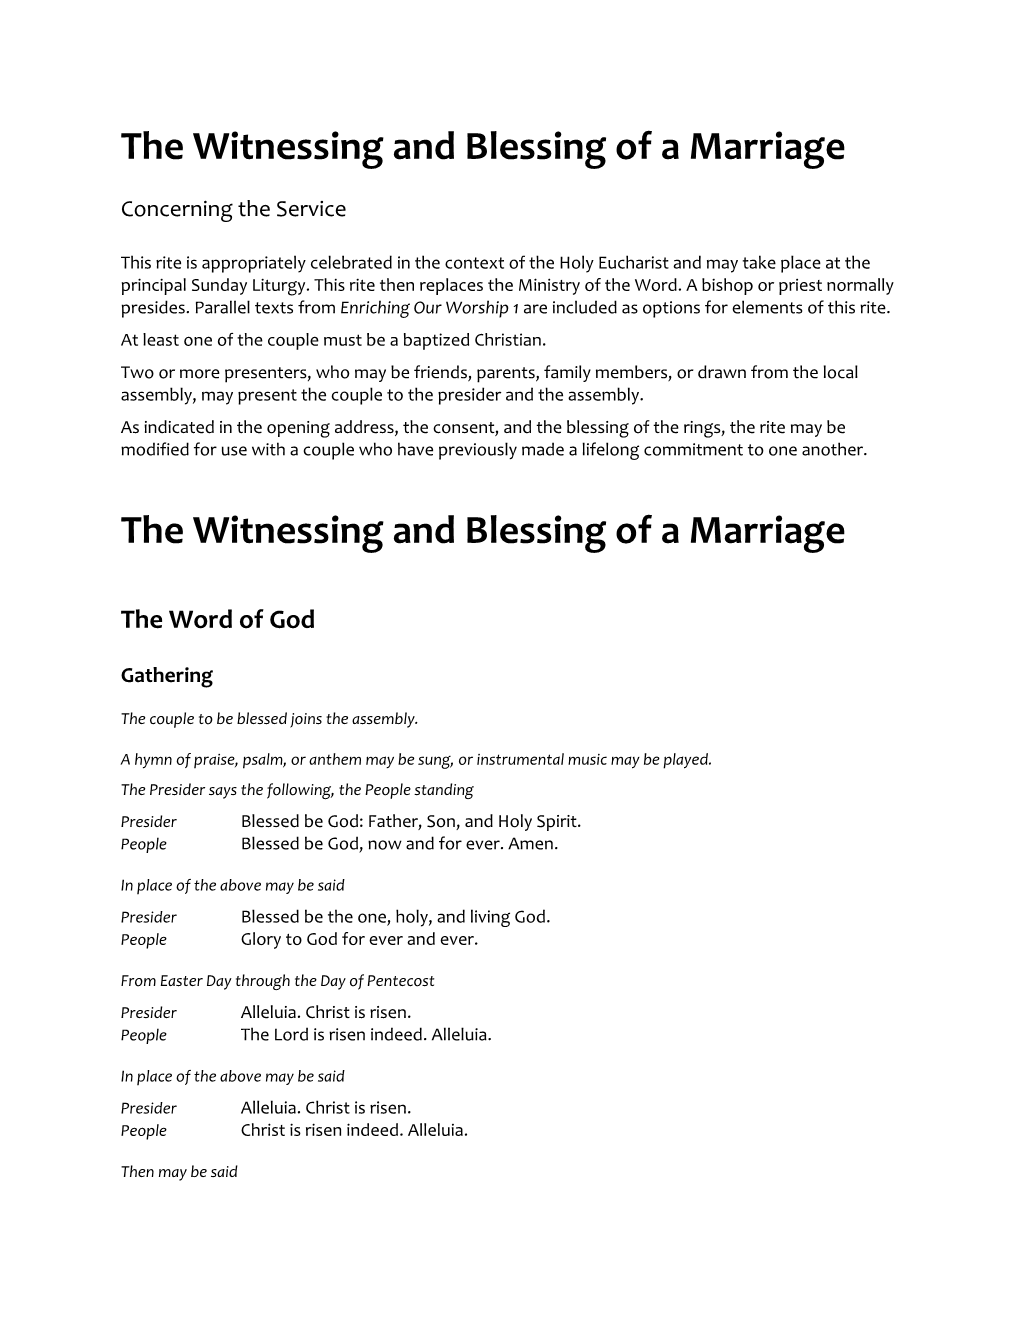 The Witnessing and Blessing of a Marriage